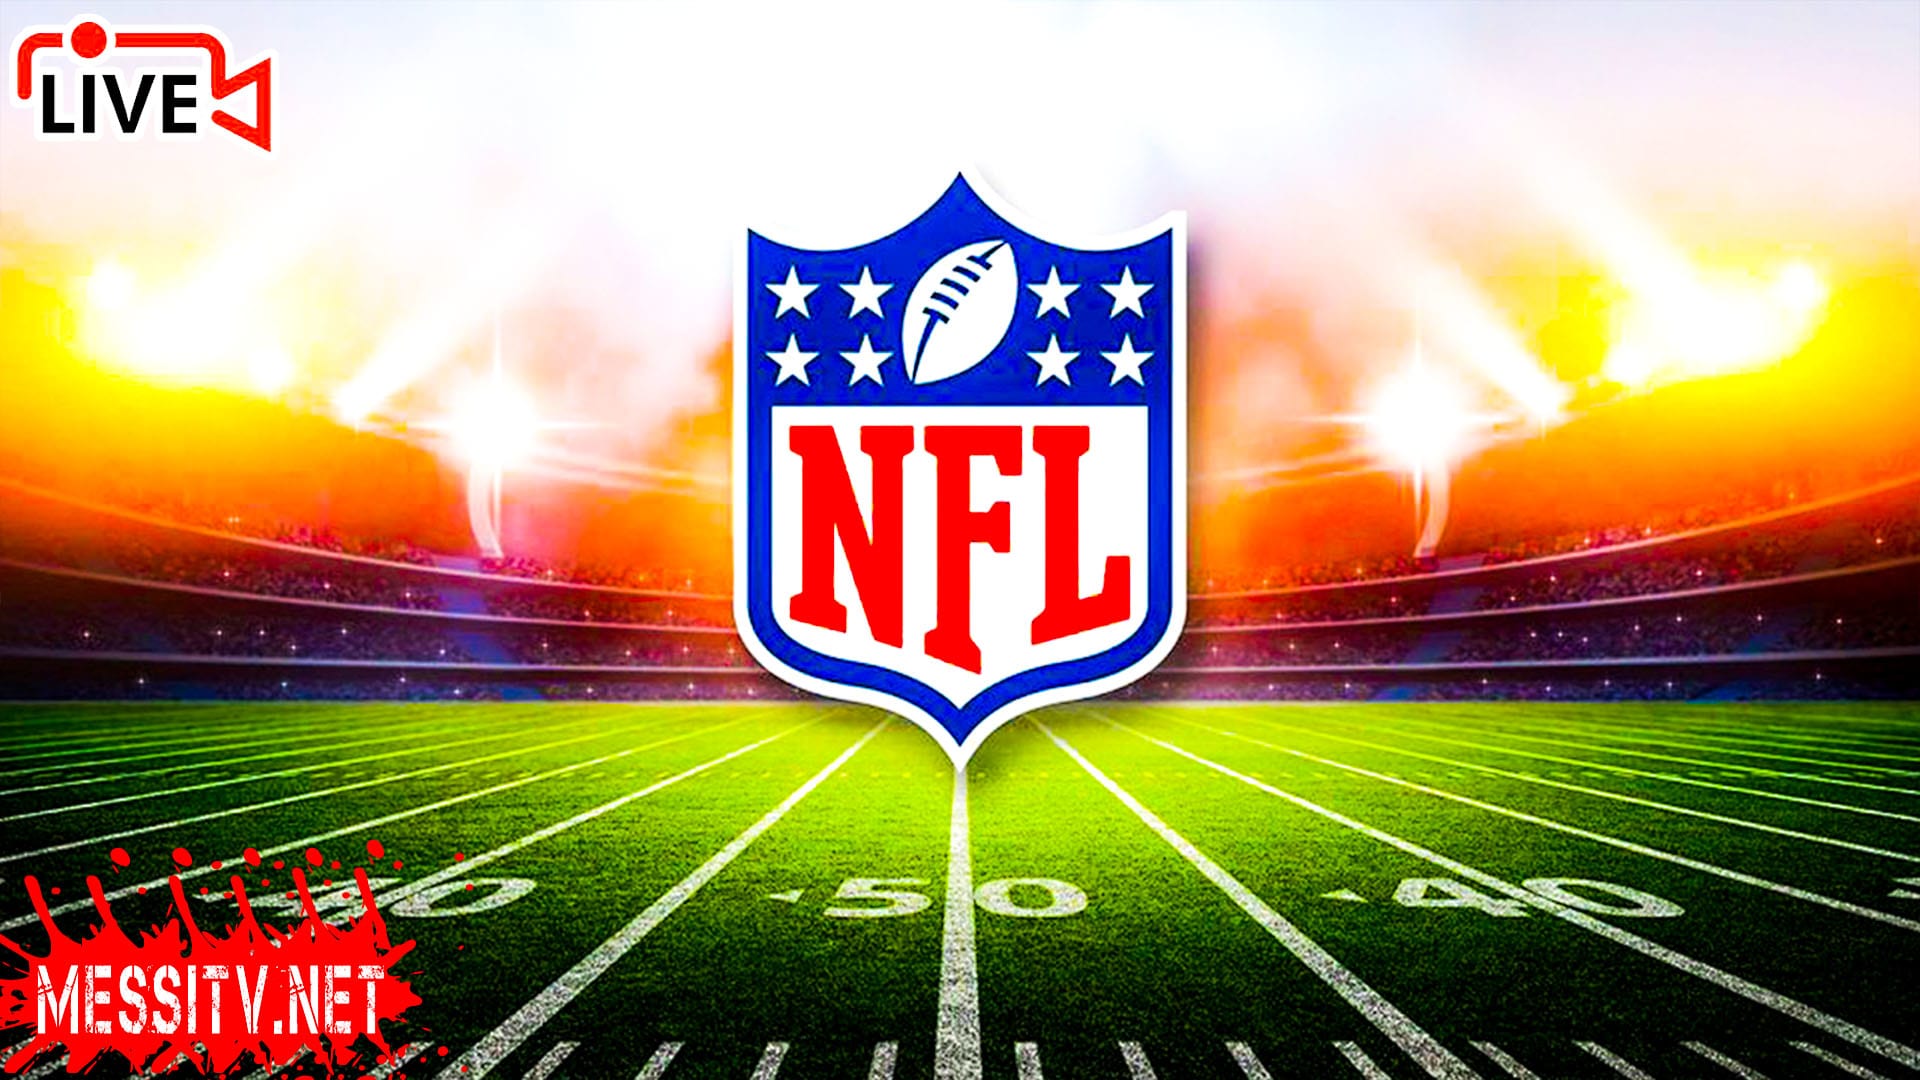 National Football League, watch NFL Live, Dolphins, Bears, Broncos, Vikings, Saints, Ravens, Browns, Jaguars, Jets, Giants, Bengals, Buccaneers, Texans, Packers, Chiefs, 49ers, Seahawks, Raiders, Chargers, Rams, Washington, Cardinals, Bills, Panthers, Falcons, Titans, Lions, Steelers, Colts, Cowboys, Eagles, #Dolphins #FinsUp #MIA #Bears #CHI #DaBears #Broncos #DEN #SB50 #BroncosCountry #Vikings #Skol #MIN #Saints #SaintsGameday #NO #Ravens #RavensFlock #Browns #CLE #Jaguars #DUUUVAL #JAX #Jets #NYJ #Giants #NYG #TogetherBlue #Bengals #RuleTheJungle #CIN #Buccaneers #GoBucs #TB #Texans #WeAreTexans #HOU #Packers #GB #GoPackGo #Chiefs #ChiefsKingdom #KC #49ers #SF #FTTB #Seahawks #GoHawks #SEA #Raiders #RaiderNation #LV #Chargers #BoltUp #LAC #Rams #RamsHouse #LAR #Washington #TeamCena #Cardinals #RedSea #Bills #BUF #BillsMafia #Panthers #KeepPounding #CAR #Falcons #RiseUpATL #ATL #Titans #TitanUp #TEN #Lions #OnePride #DET #Steelers #HereWeGo #PIT #Colts #ForTheShoe #IND #Cowboys #DallasCowboys #DAL #Eagles #FlyEaglesFly #PHI #NYJ, Wild Card, Divisional Playoff, conference championship, Pro Bowl, Super Bowl 